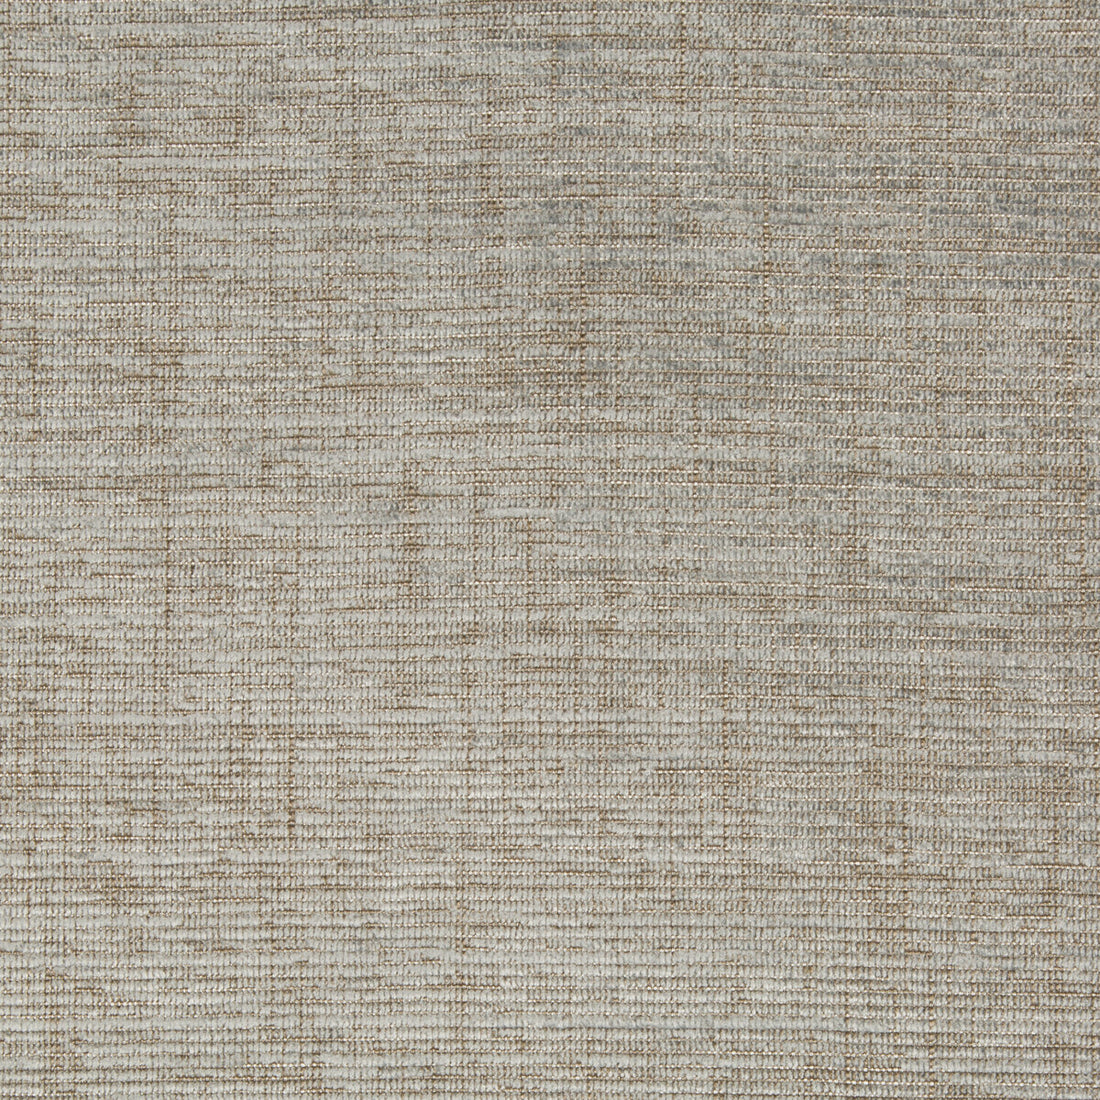 Mineralogy fabric in heron color - pattern 34842.52.0 - by Kravet Couture in the Barbara Barry Panorama collection